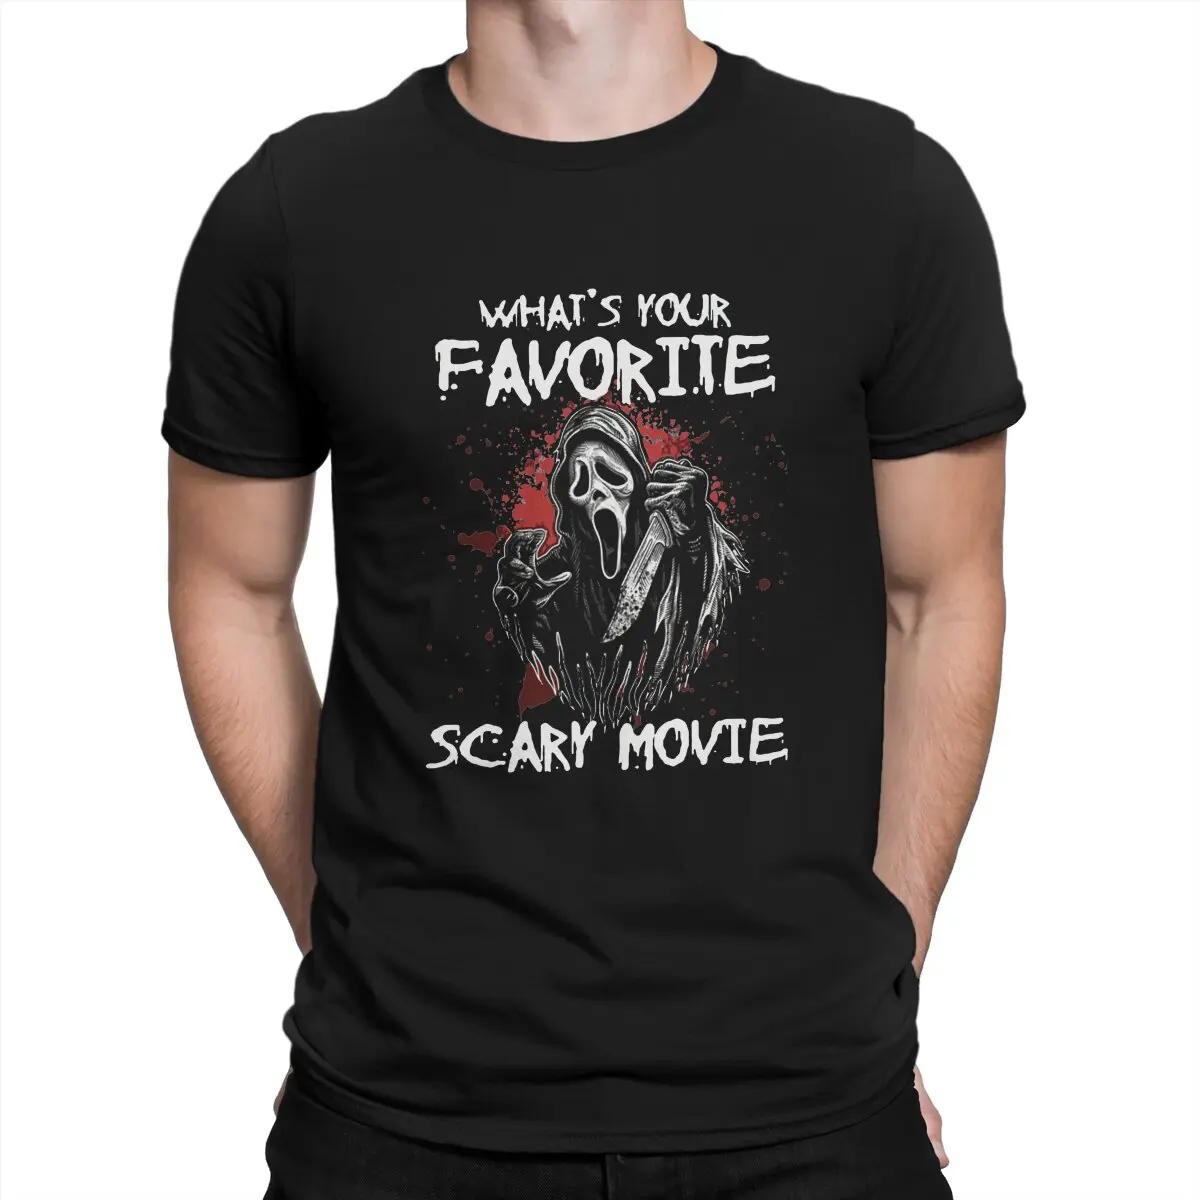 

Scream Horror Movie Newest TShirt for Men Whats Is Your Favorite Scary Movie Round Collar Basic T Shirt Distinctive